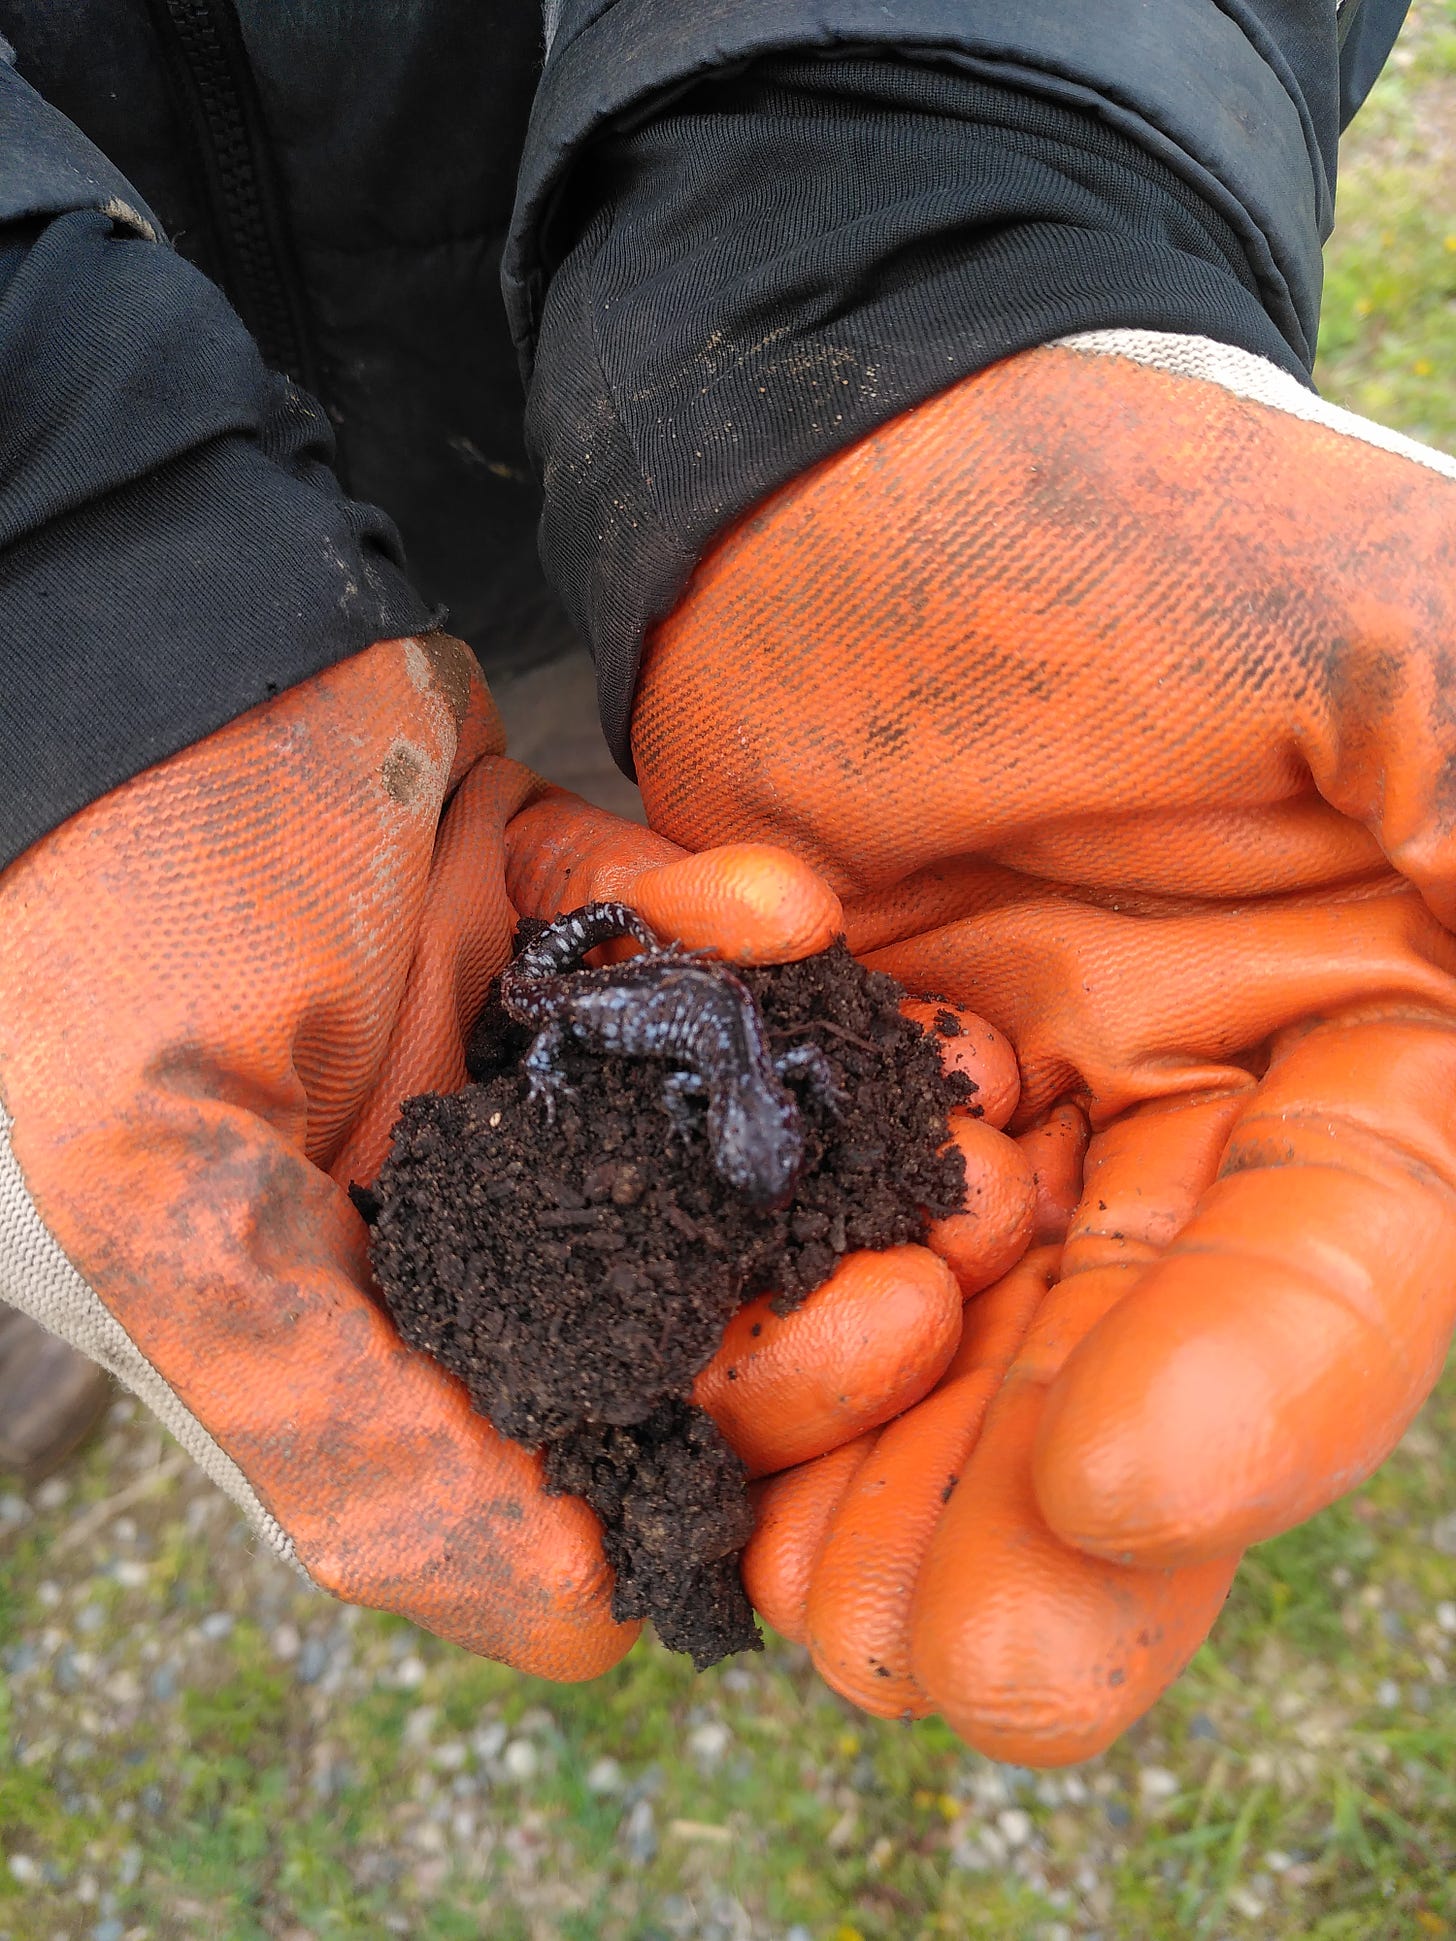 with dispelling the apocalyptic vibes (at least I got the memo on the colour scheme). Bright Orange work gloves clasp a pile of dirt atop which a small black salamander sits.